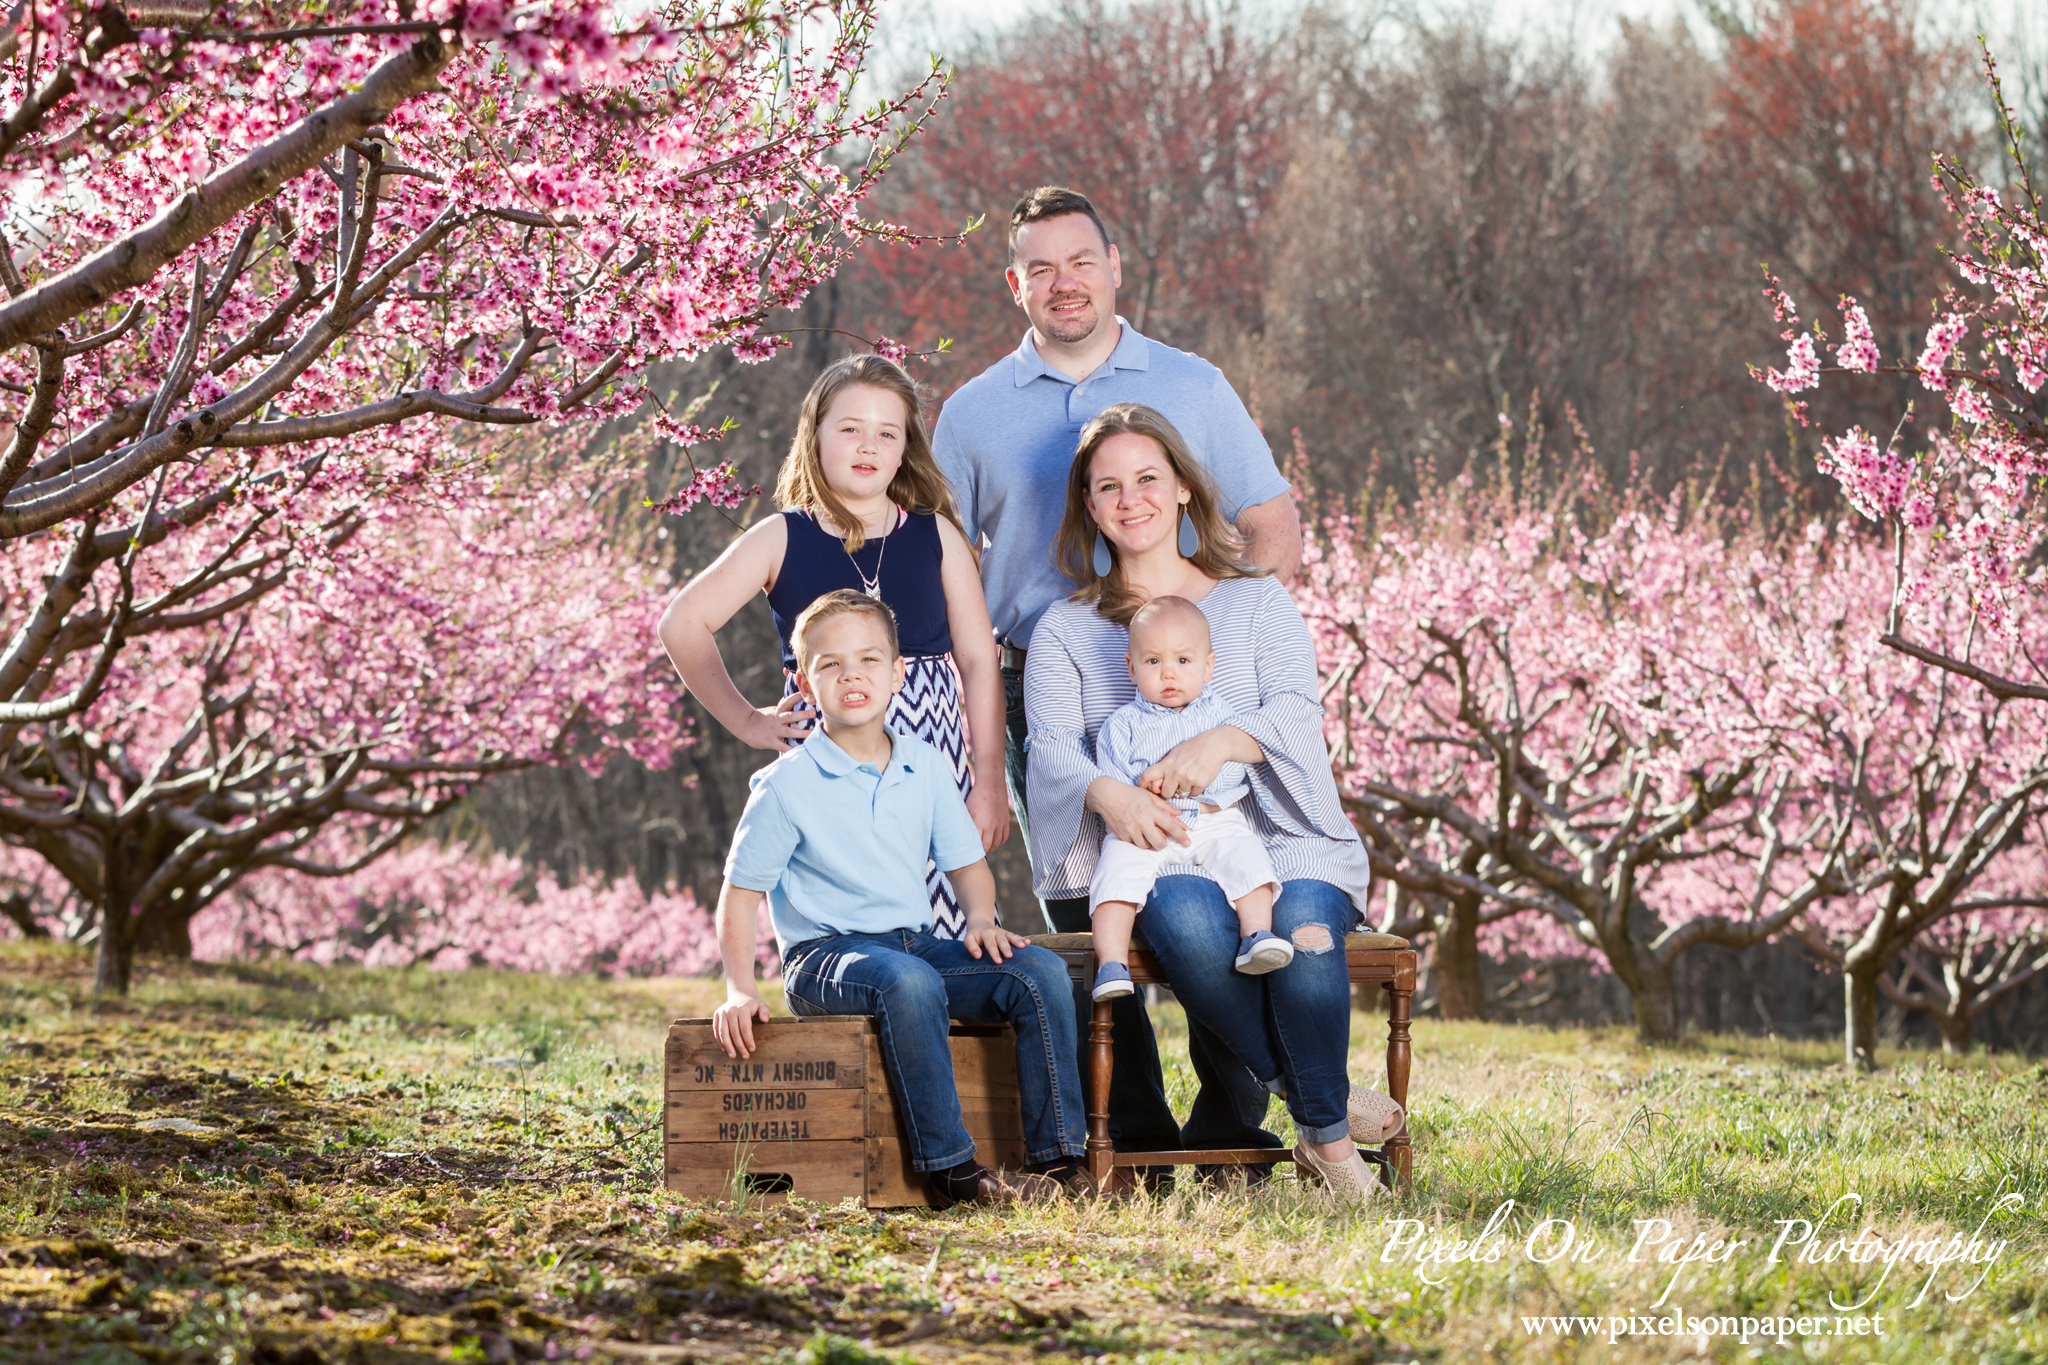 pixels on paper photographers overby family outdoor peach orchard portrait photo